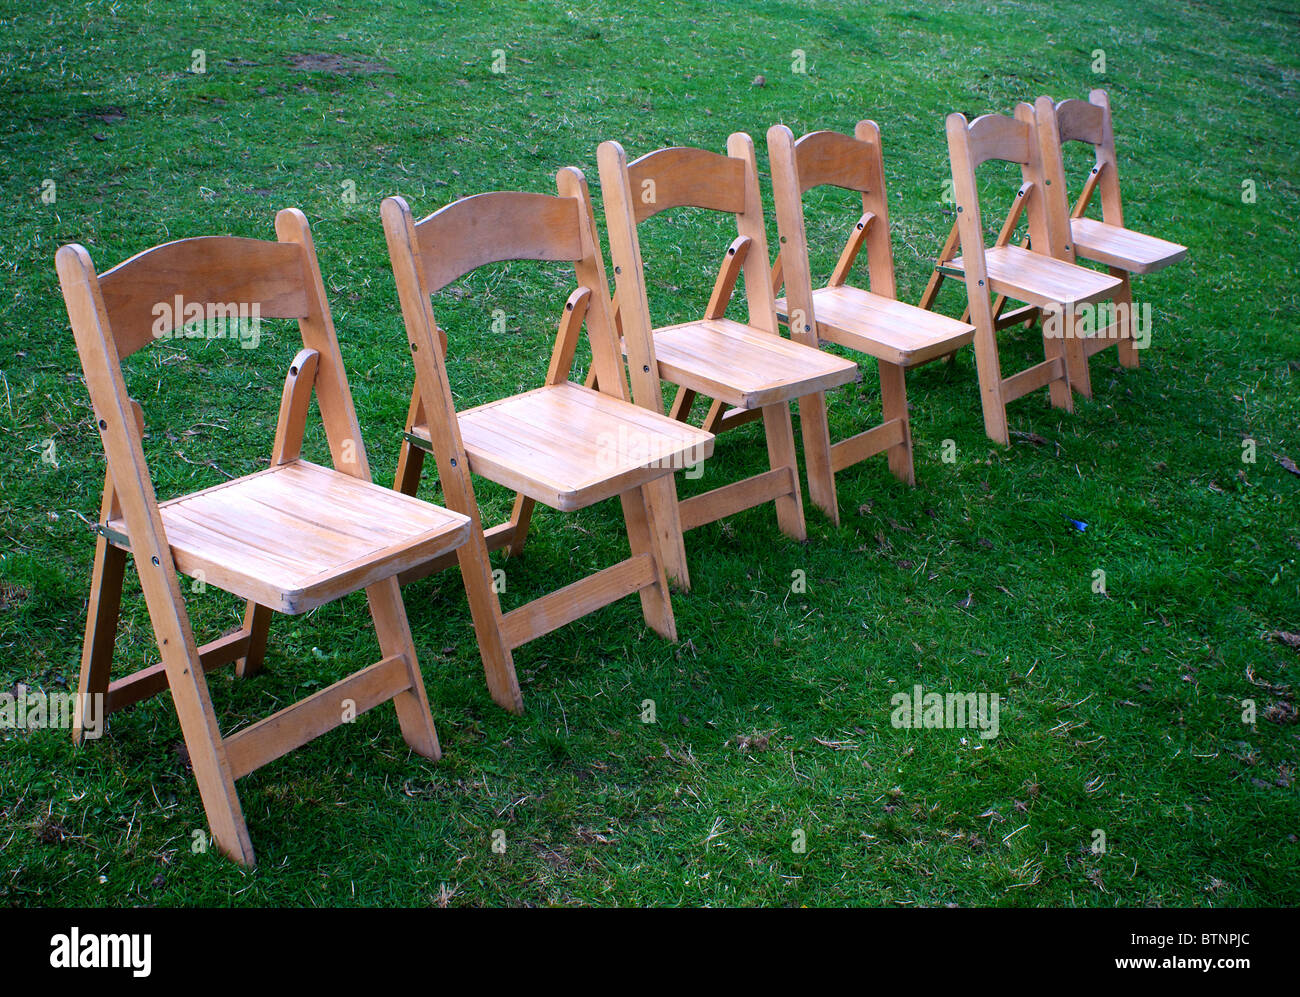 Folding chairs arranged in a straight line outdoors Stock Photo